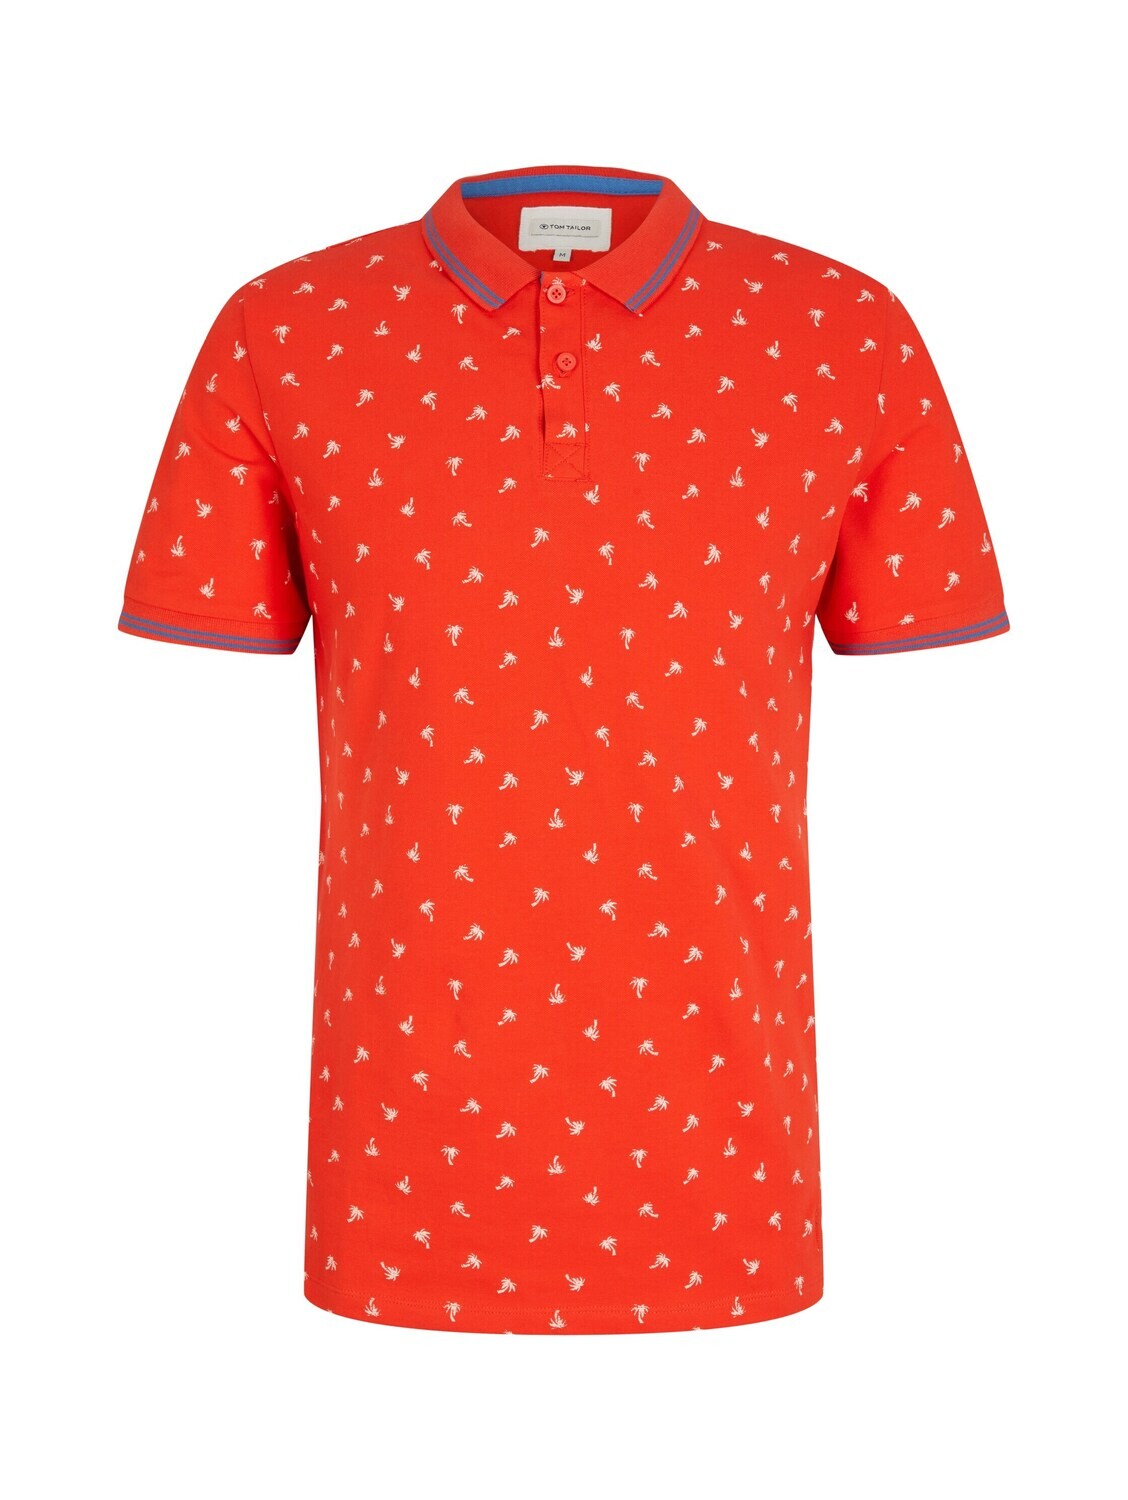 Tom Tailor polo met print, coral palm design